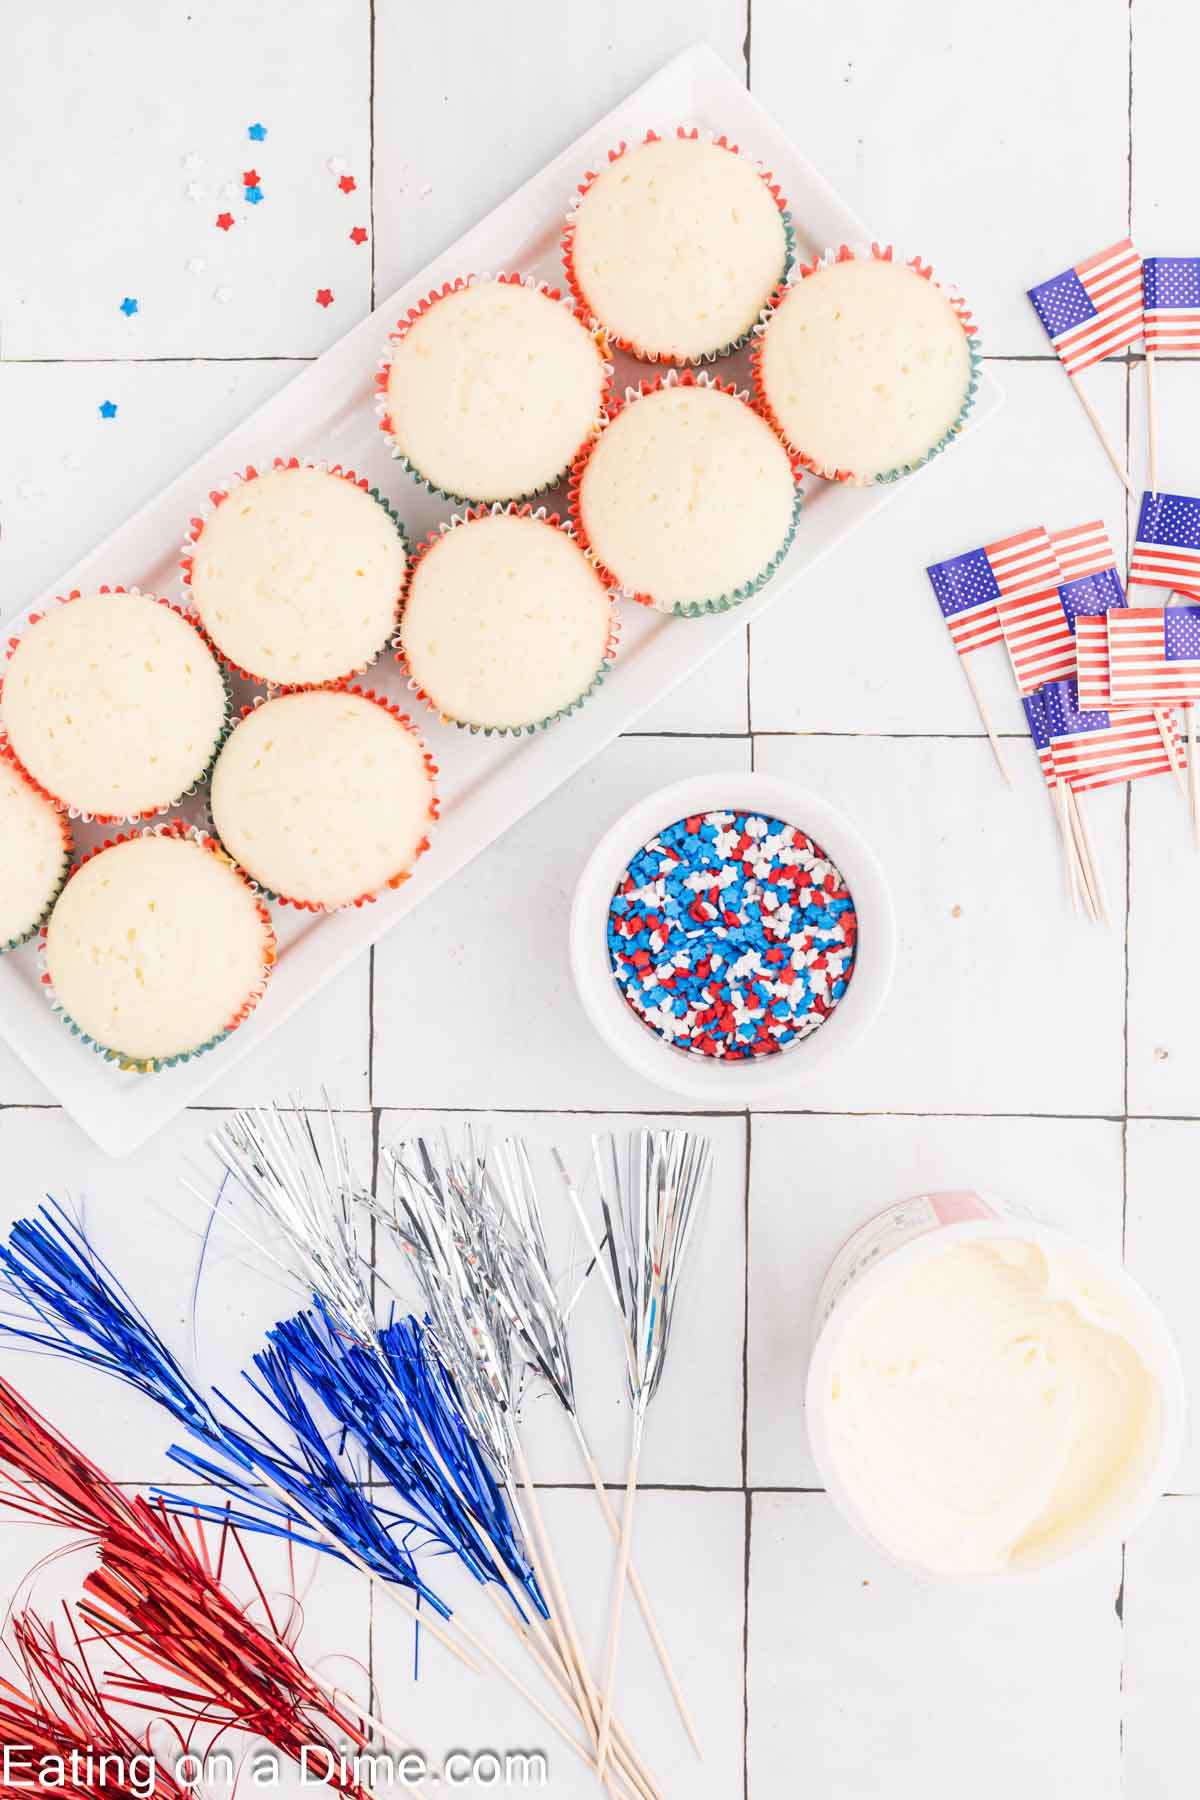 A tray of unfrosted Firecracker Cupcakes sits on a tile countertop, surrounded by small American flag toothpick toppers, red, white, and blue star-shaped sprinkles in a bowl, a tub of white frosting, and metallic blue, red, and silver decorations.